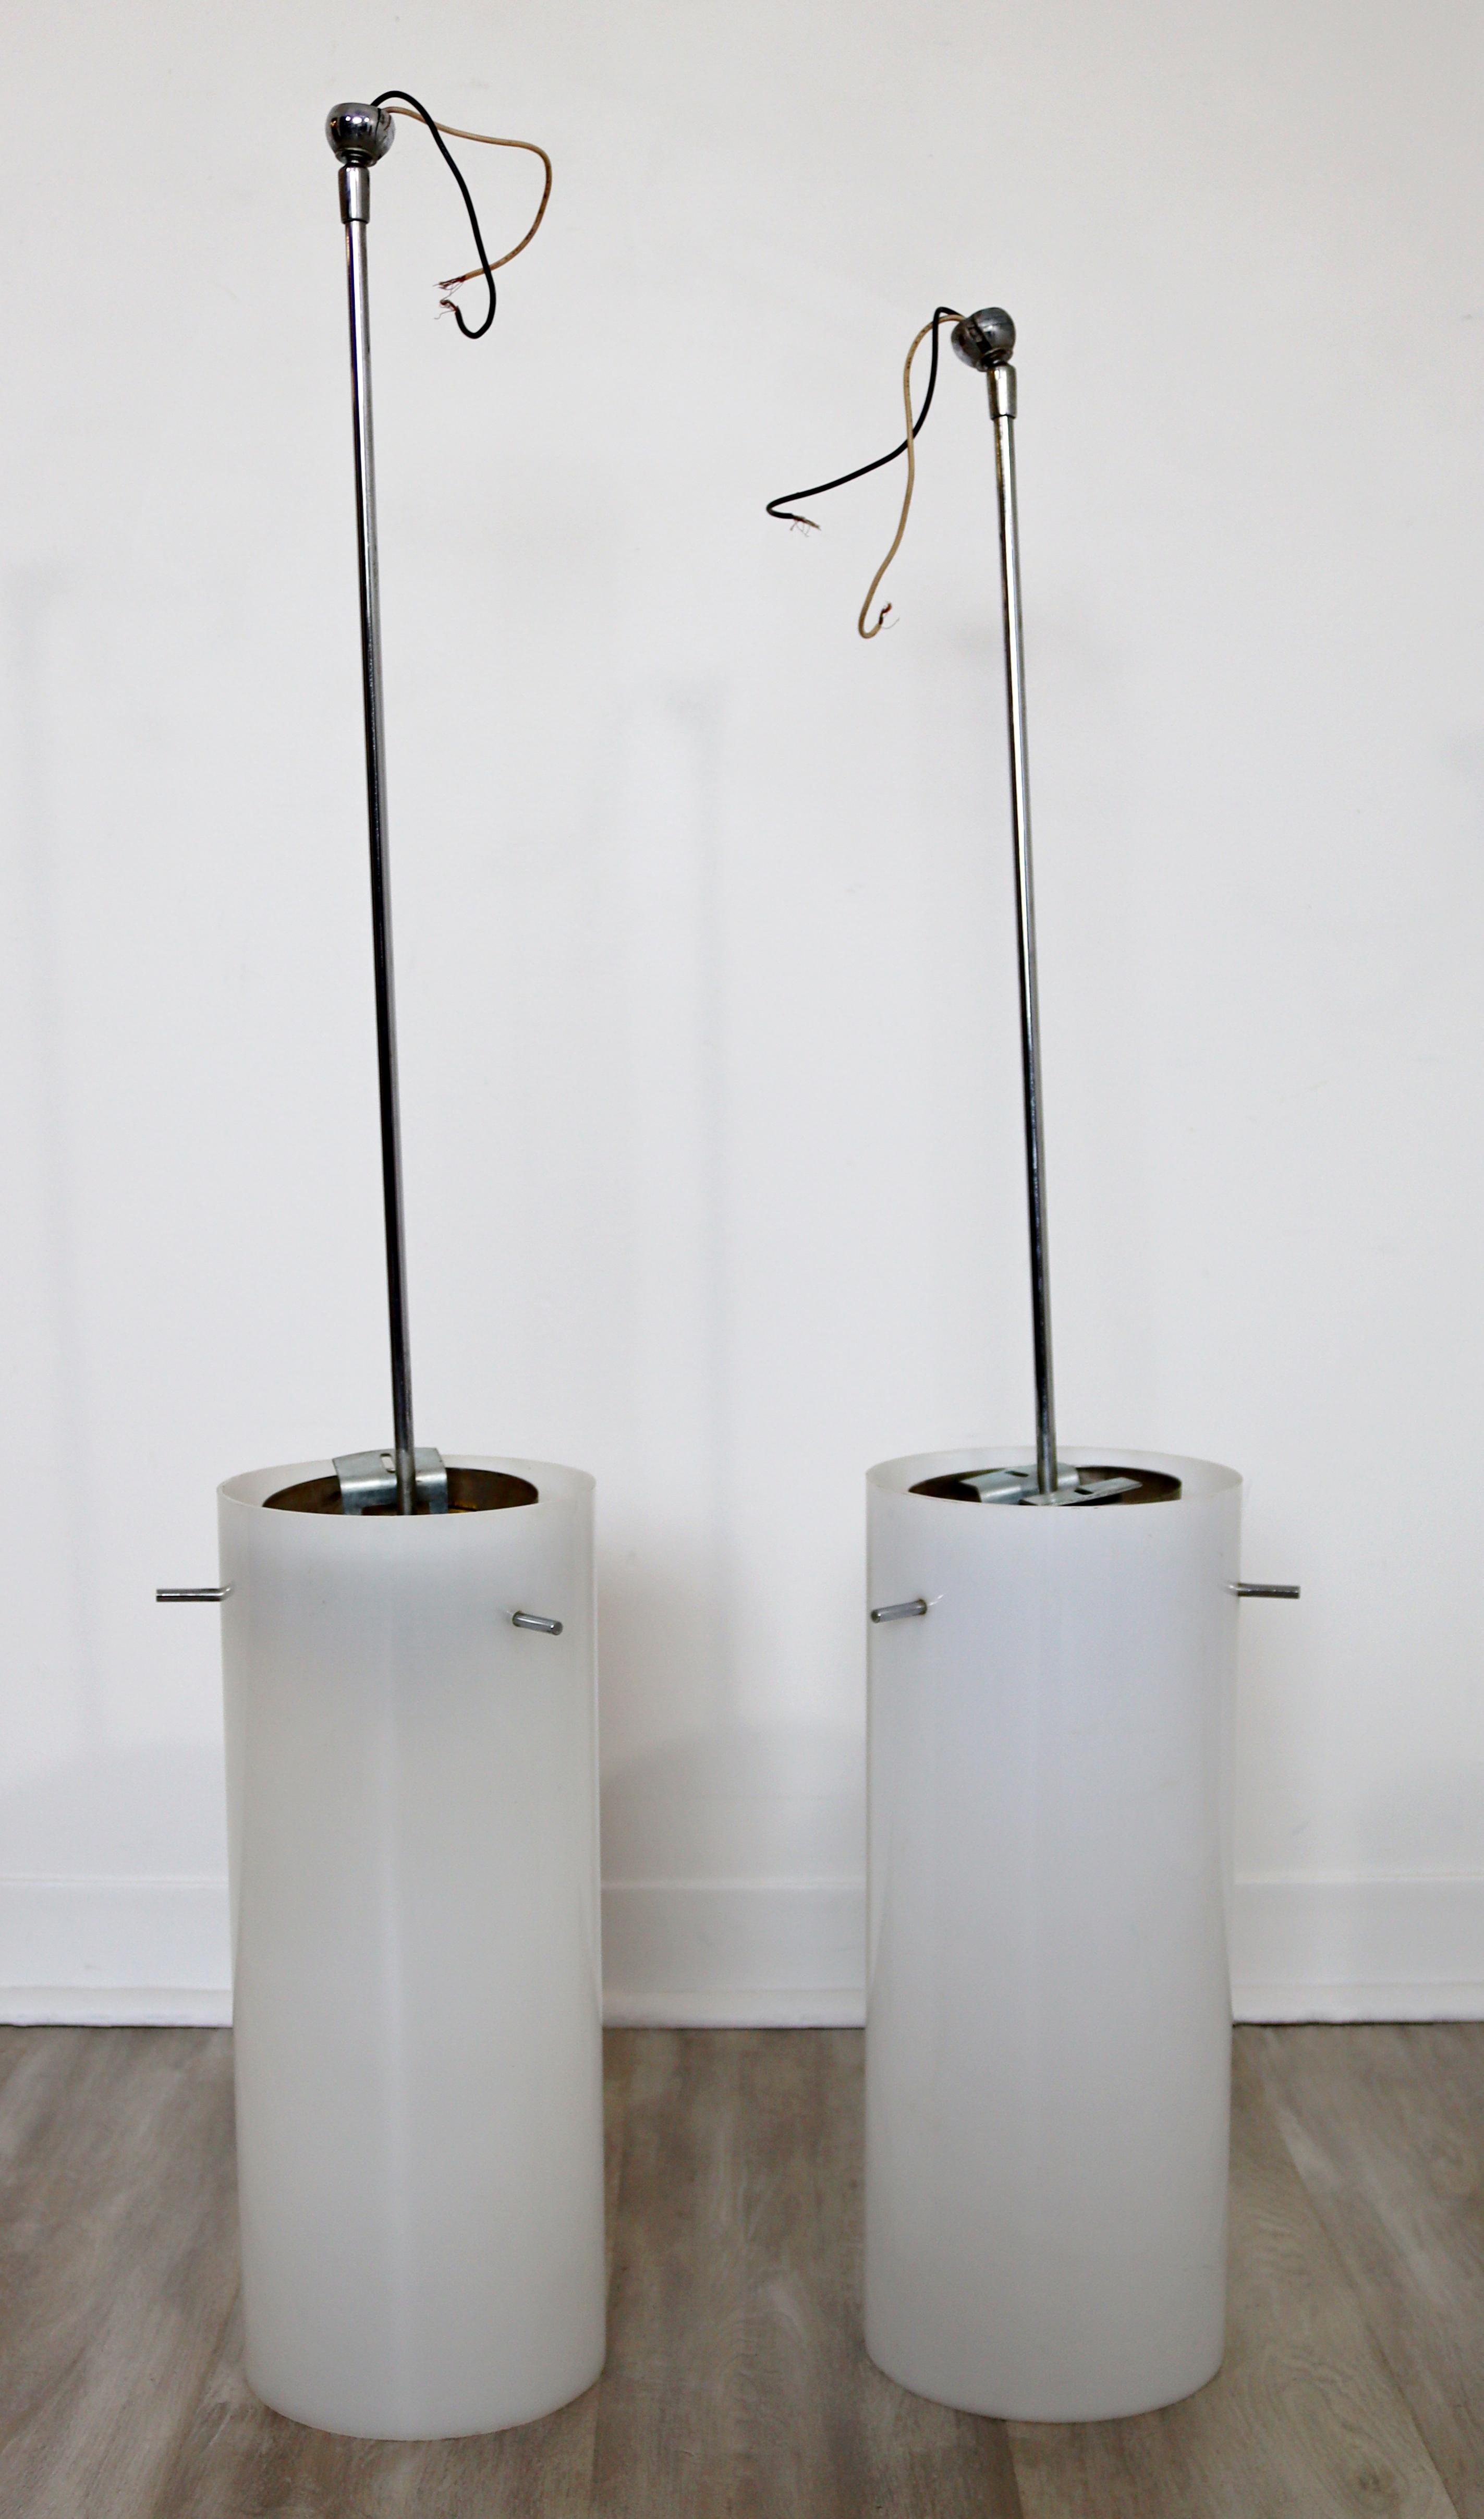 For your consideration is a pretty pair of pendant light fixtures by Paul Mayen, circa the 1960s. In excellent condition. The dimensions are 7